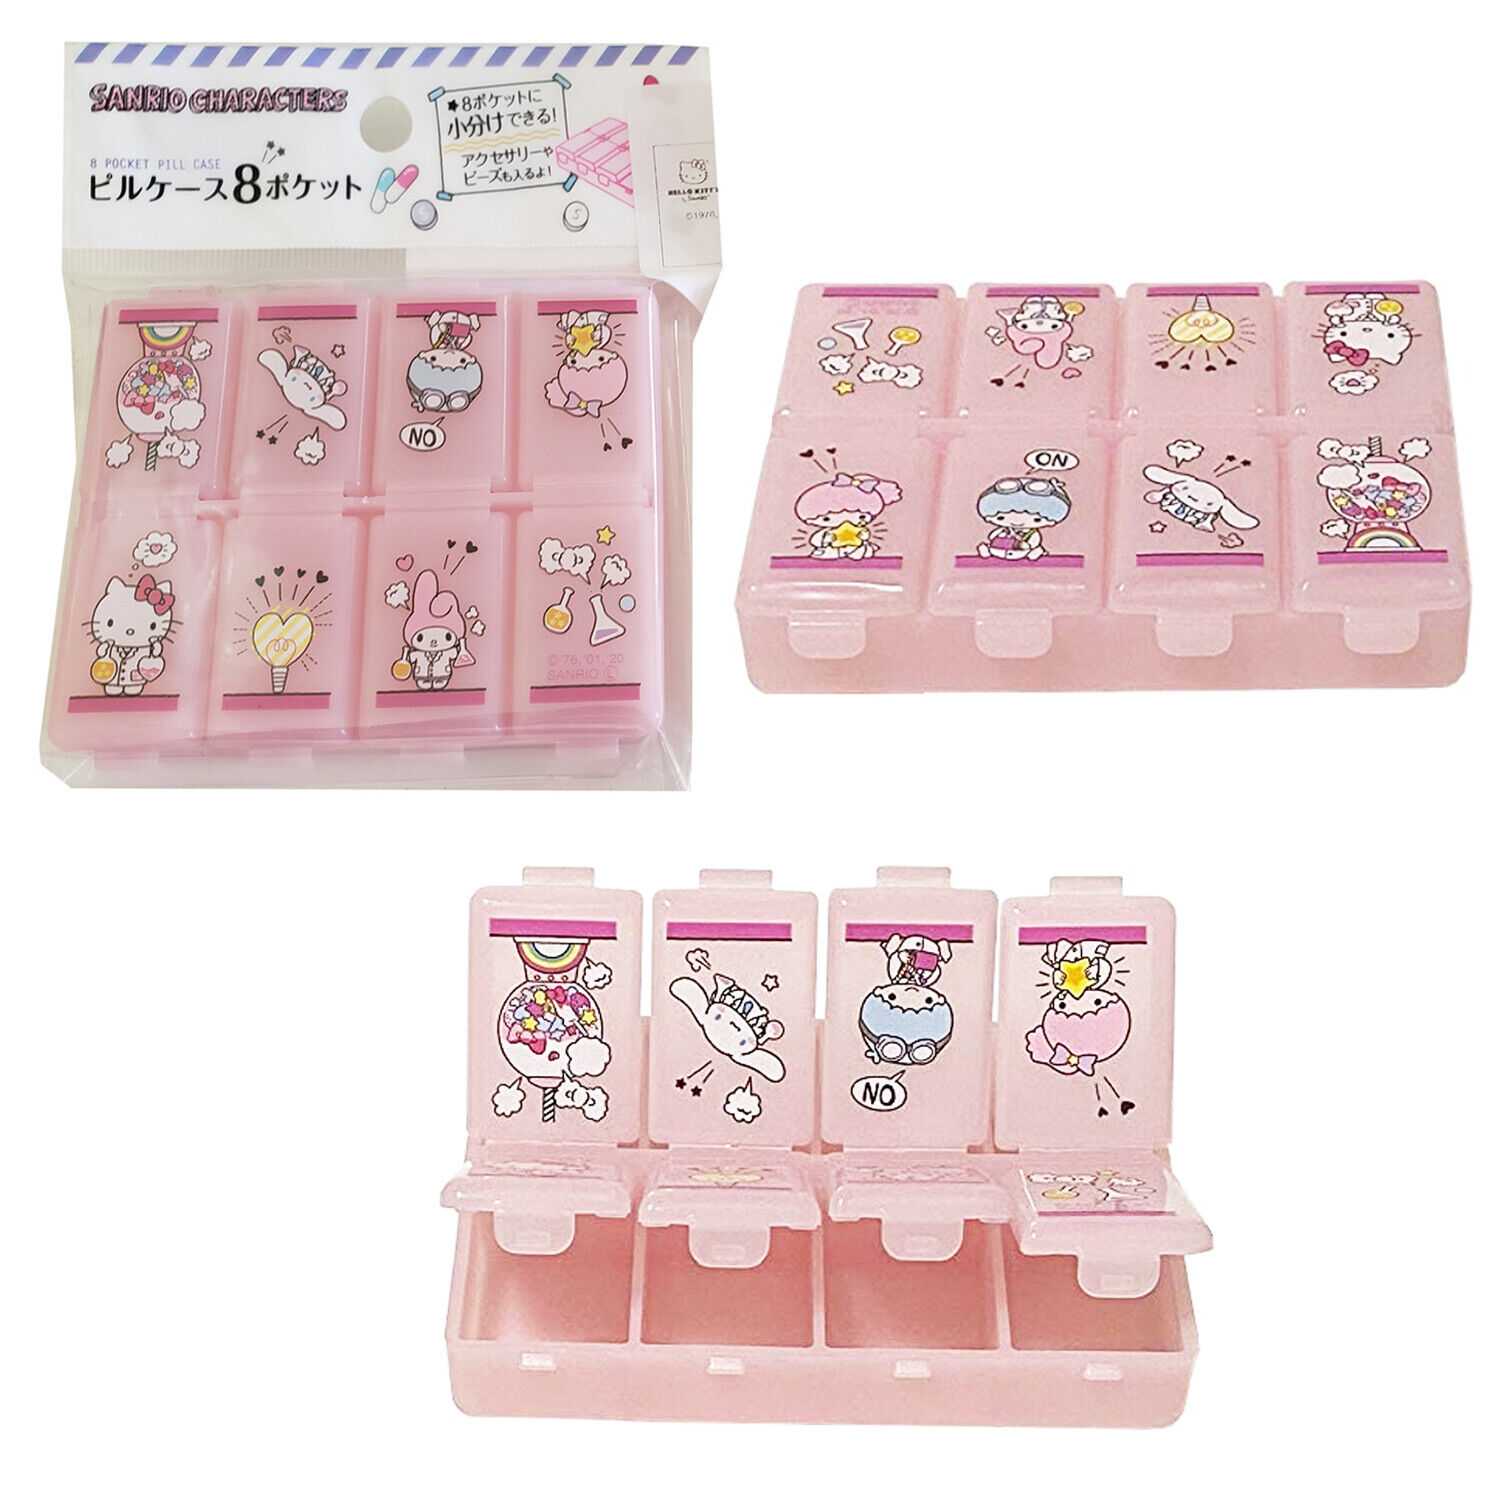 Sanrio Characters Hello Kitty My Melody Little Twin Stars 8 Pocket Pill Case